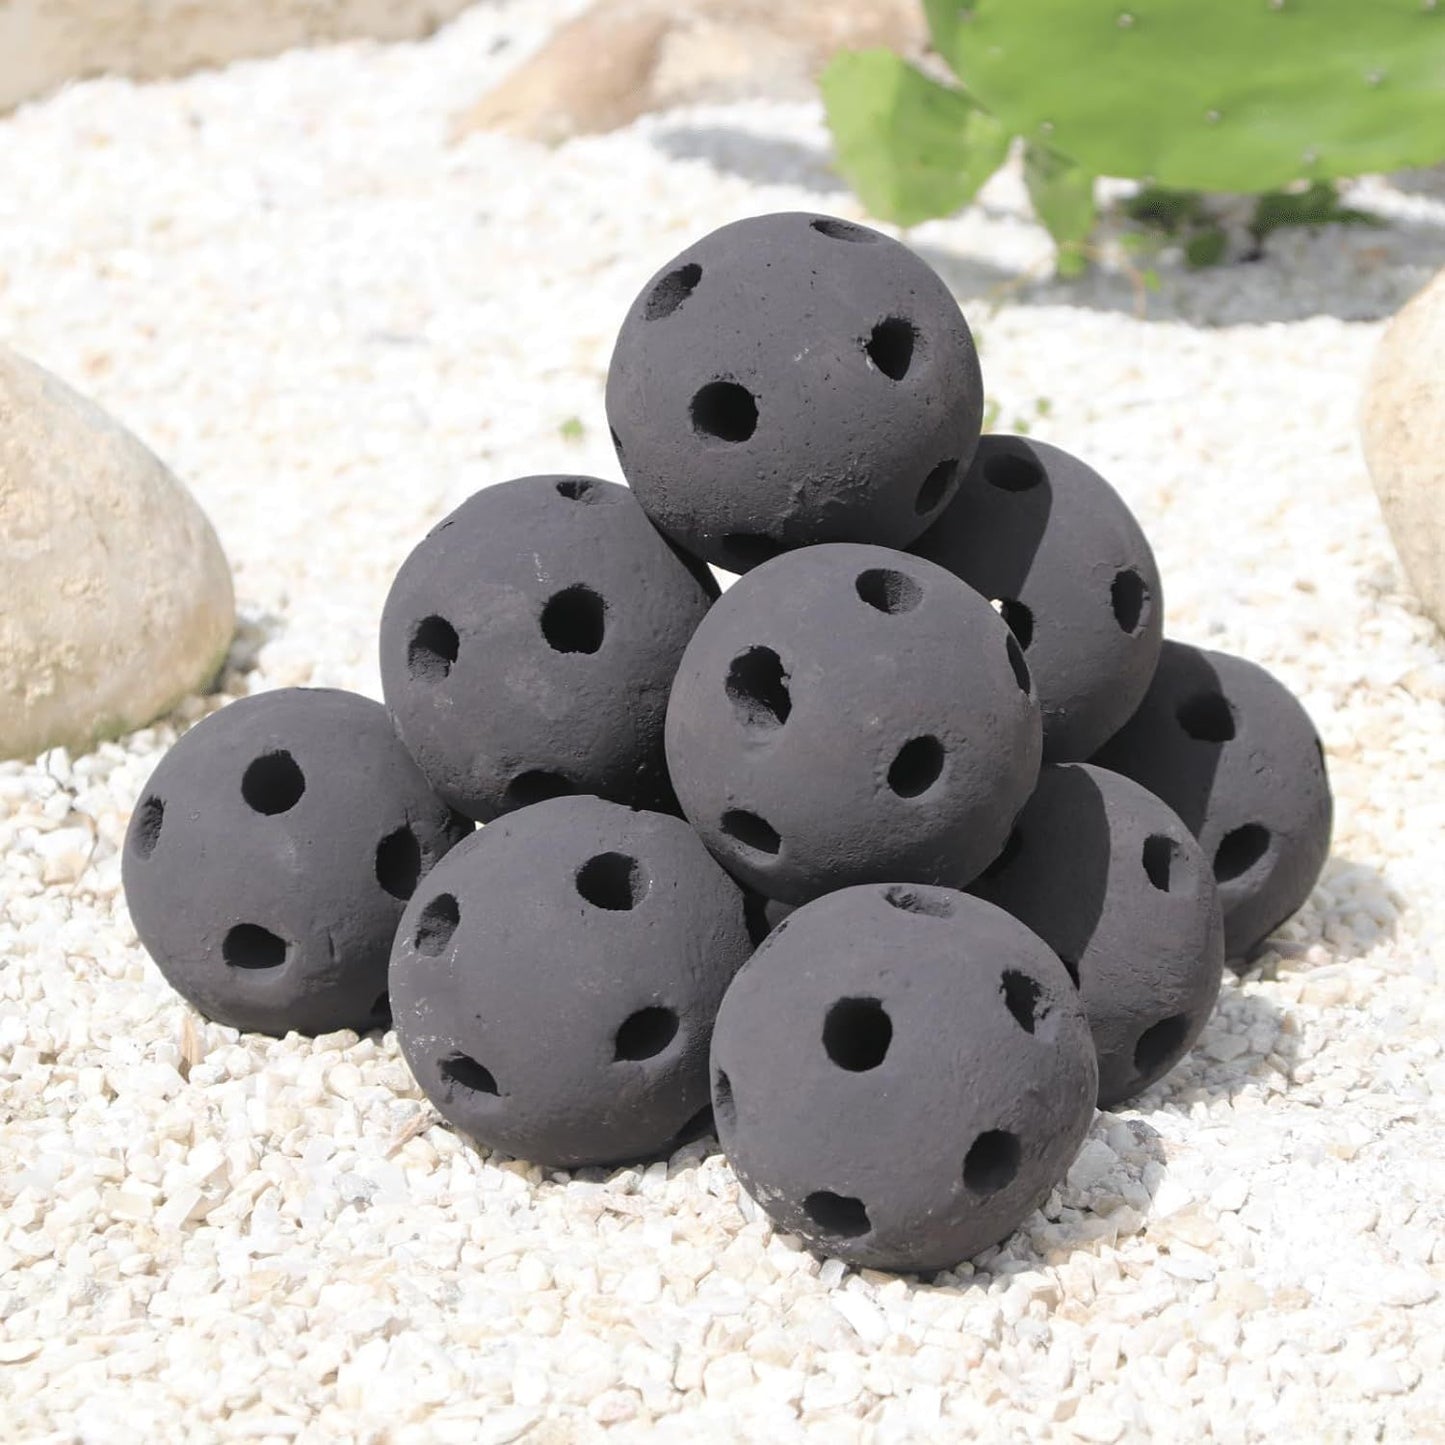 Hollow Ceramic Fire Balls, Set of 10 Fireplace Balls, for Outdoor Fire Pits or Fire Tables